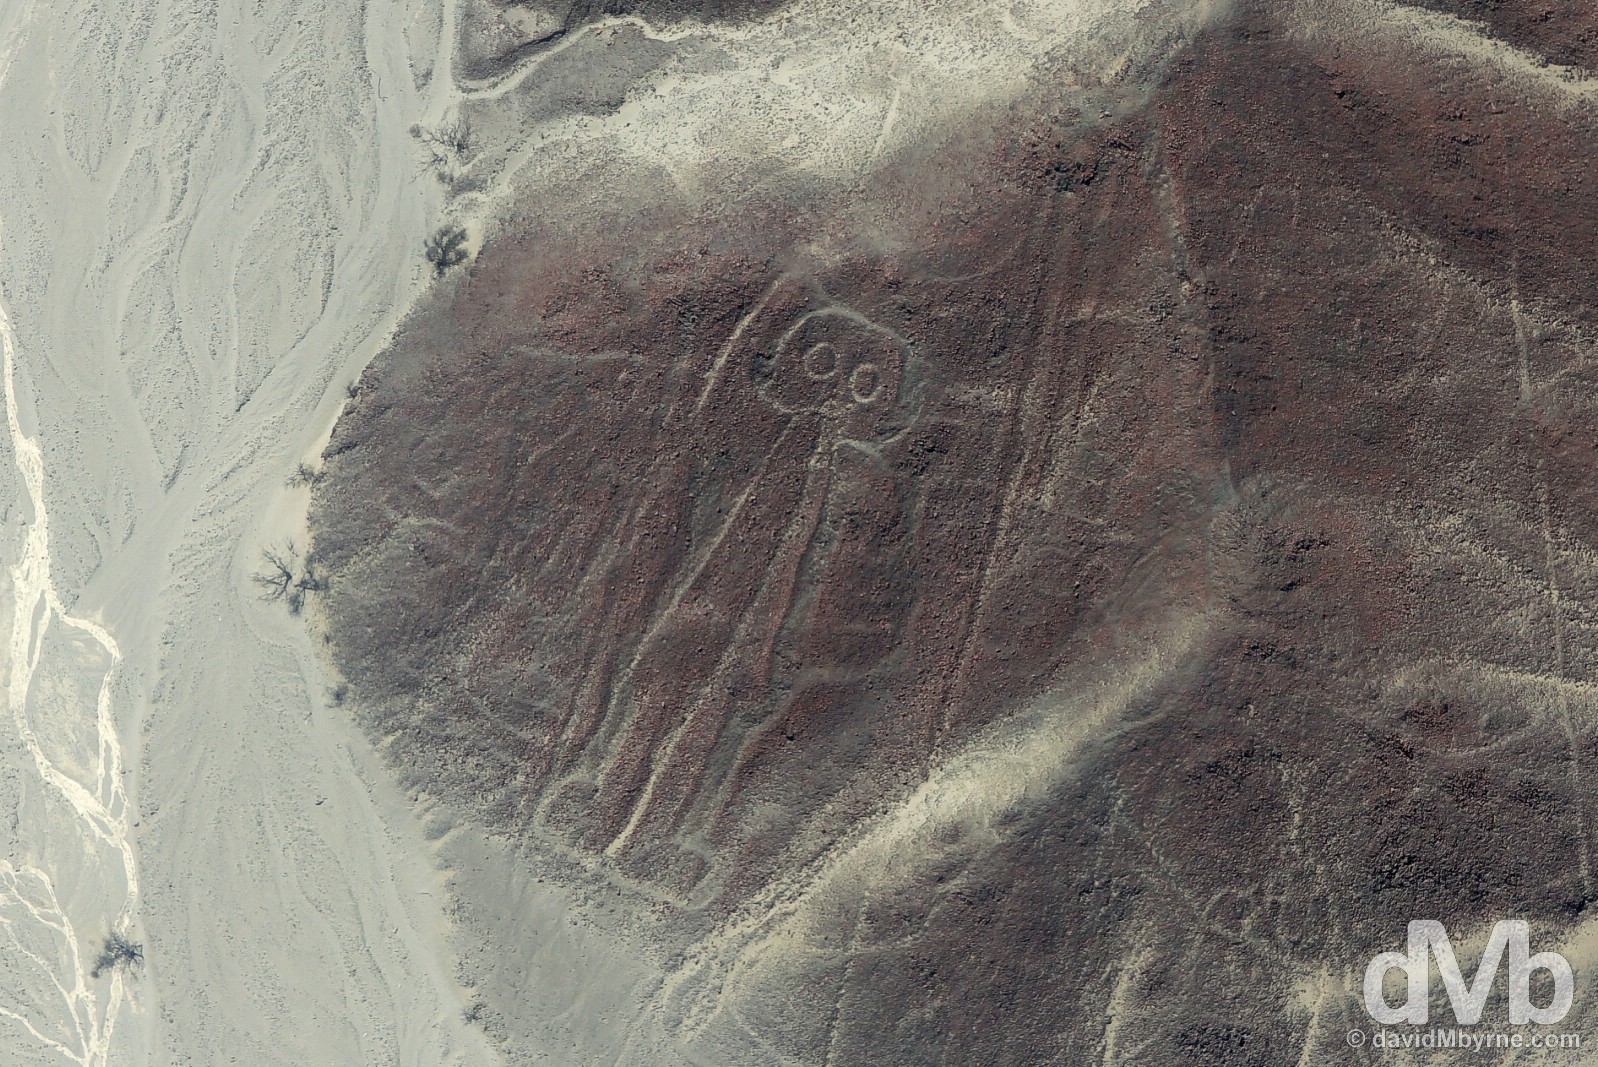 The Astronaut of the Nasca Lines, Nasca Plain, southern Peru. August 11, 2015. 